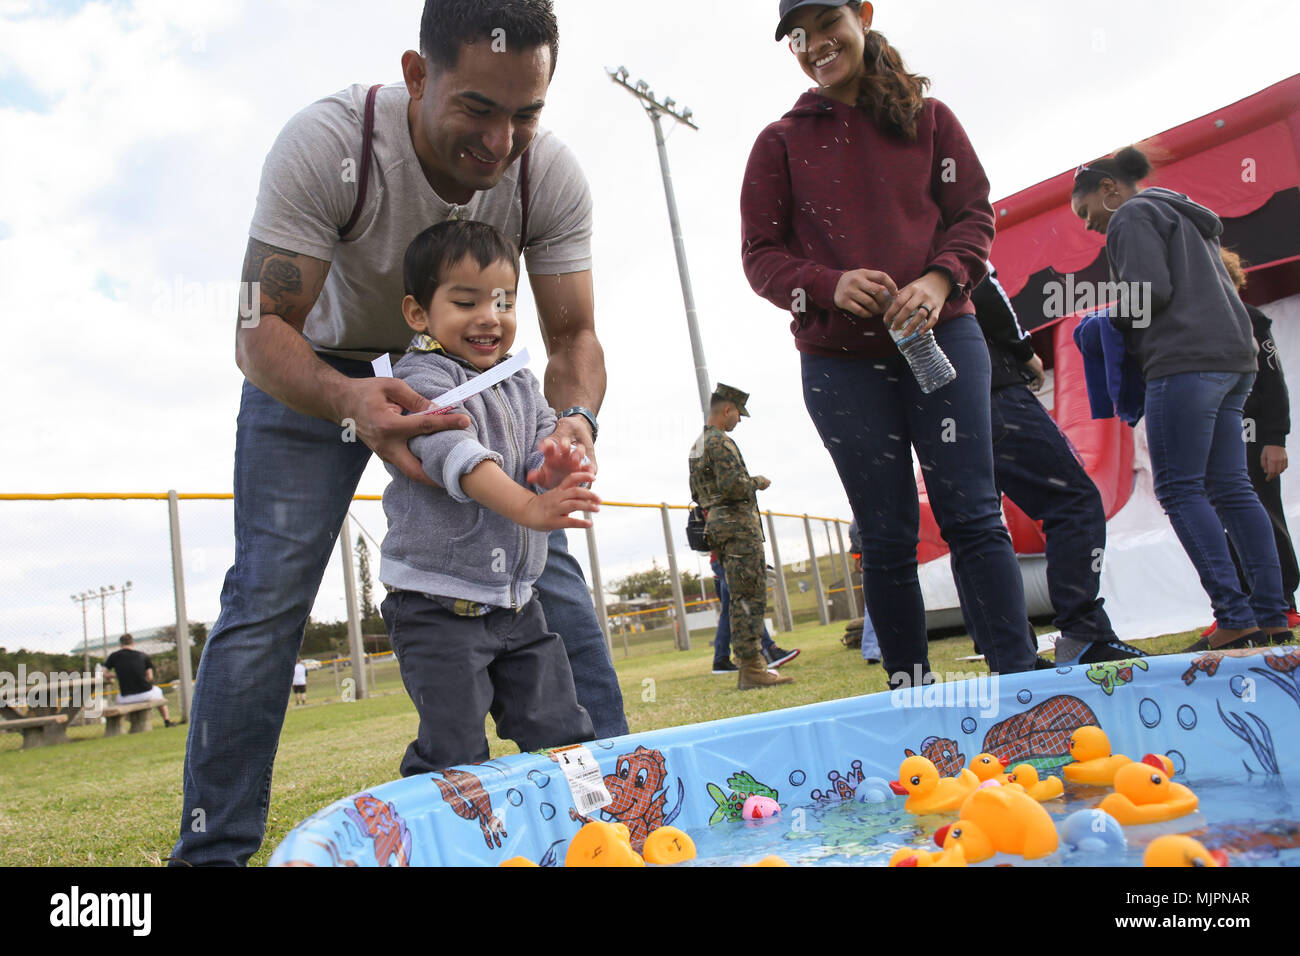 Alexander, 2, makes a splash in a rubber duck game during the third annual  Reindeer Games Dec. 22, 2017 at Camp Kinser, Okinawa, Japan. Alexander's  father, Staff Sgt. Gabriel Deandas, is the